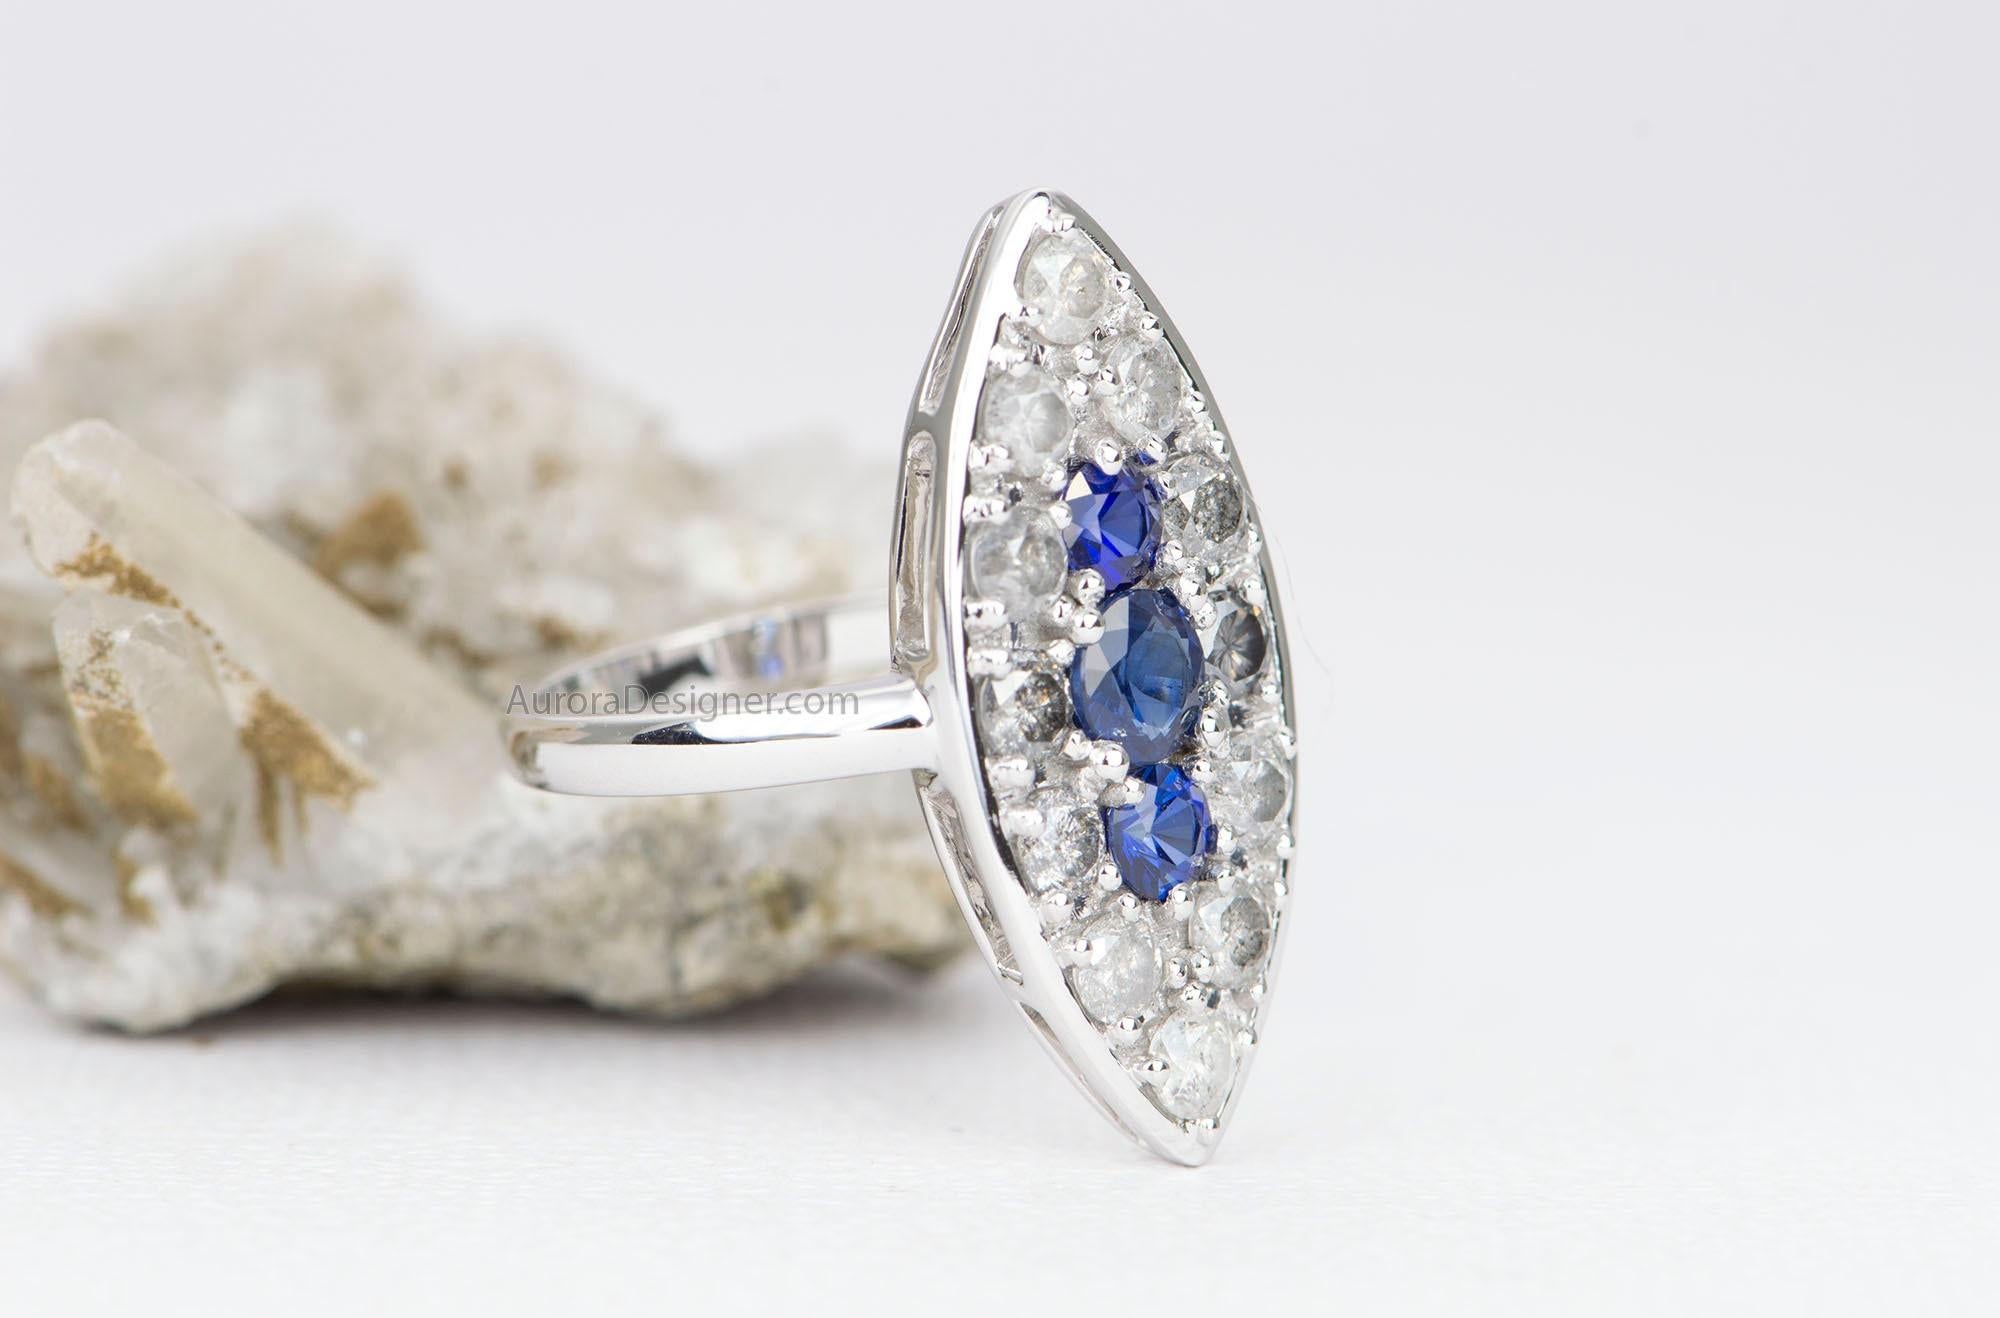 ♥  This is a vintage-inspired ring created in the Victorian era navette ring style
♥  Three royal blue sapphires are set in the center, then surrounded by a ring of ombre colored diamonds ranging from milky white to dark gray 
♥  True to the antique